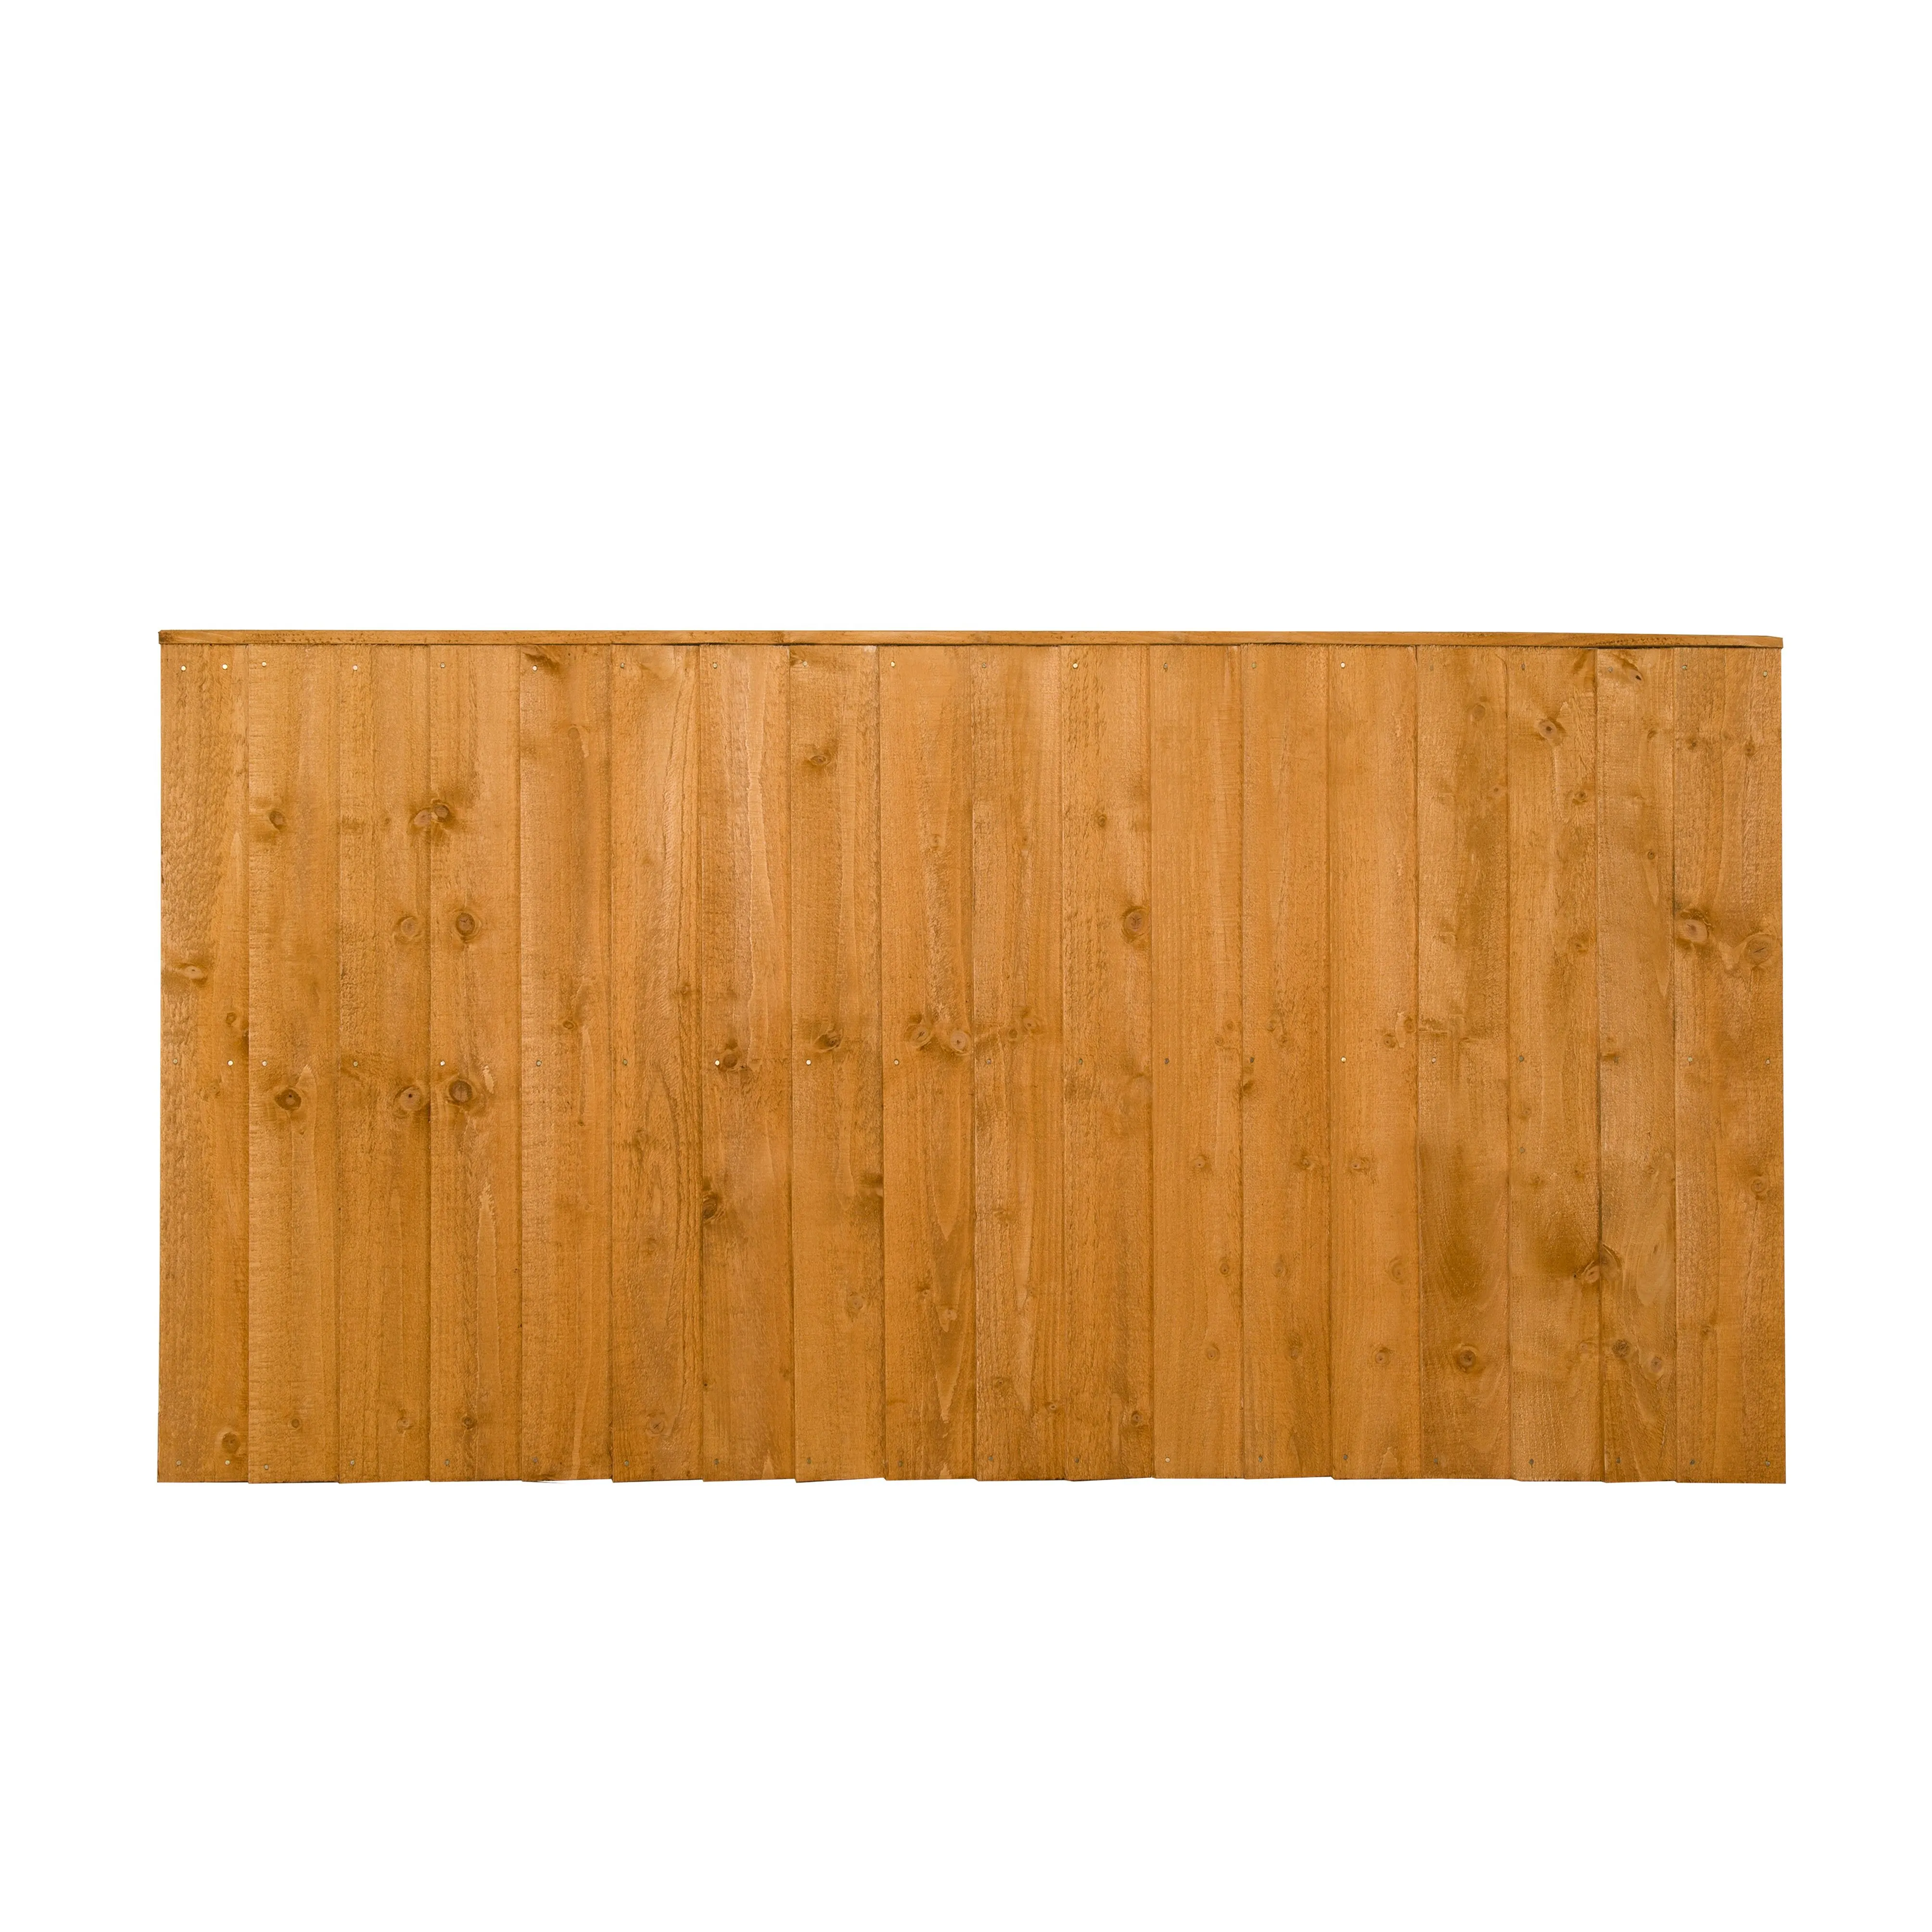 Dip treated Fence panel (W)1.83m (H)0.93m, Pack of 5